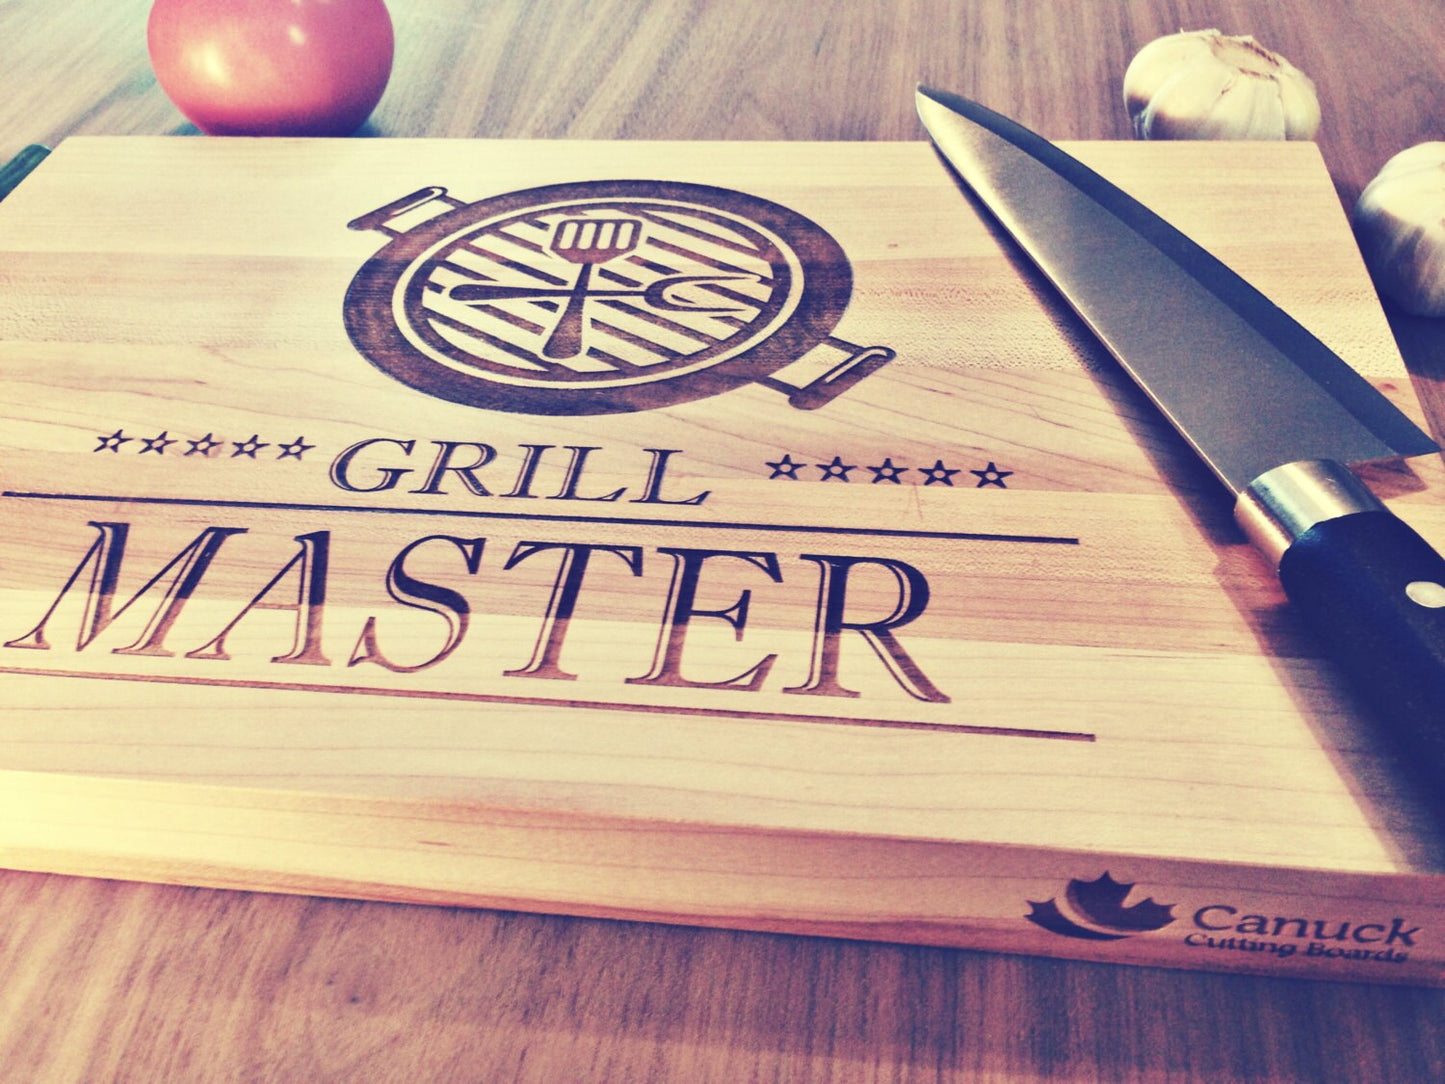 Hard Maple Canuck Cutting Board Laser Engraved With "Grill Master" Design